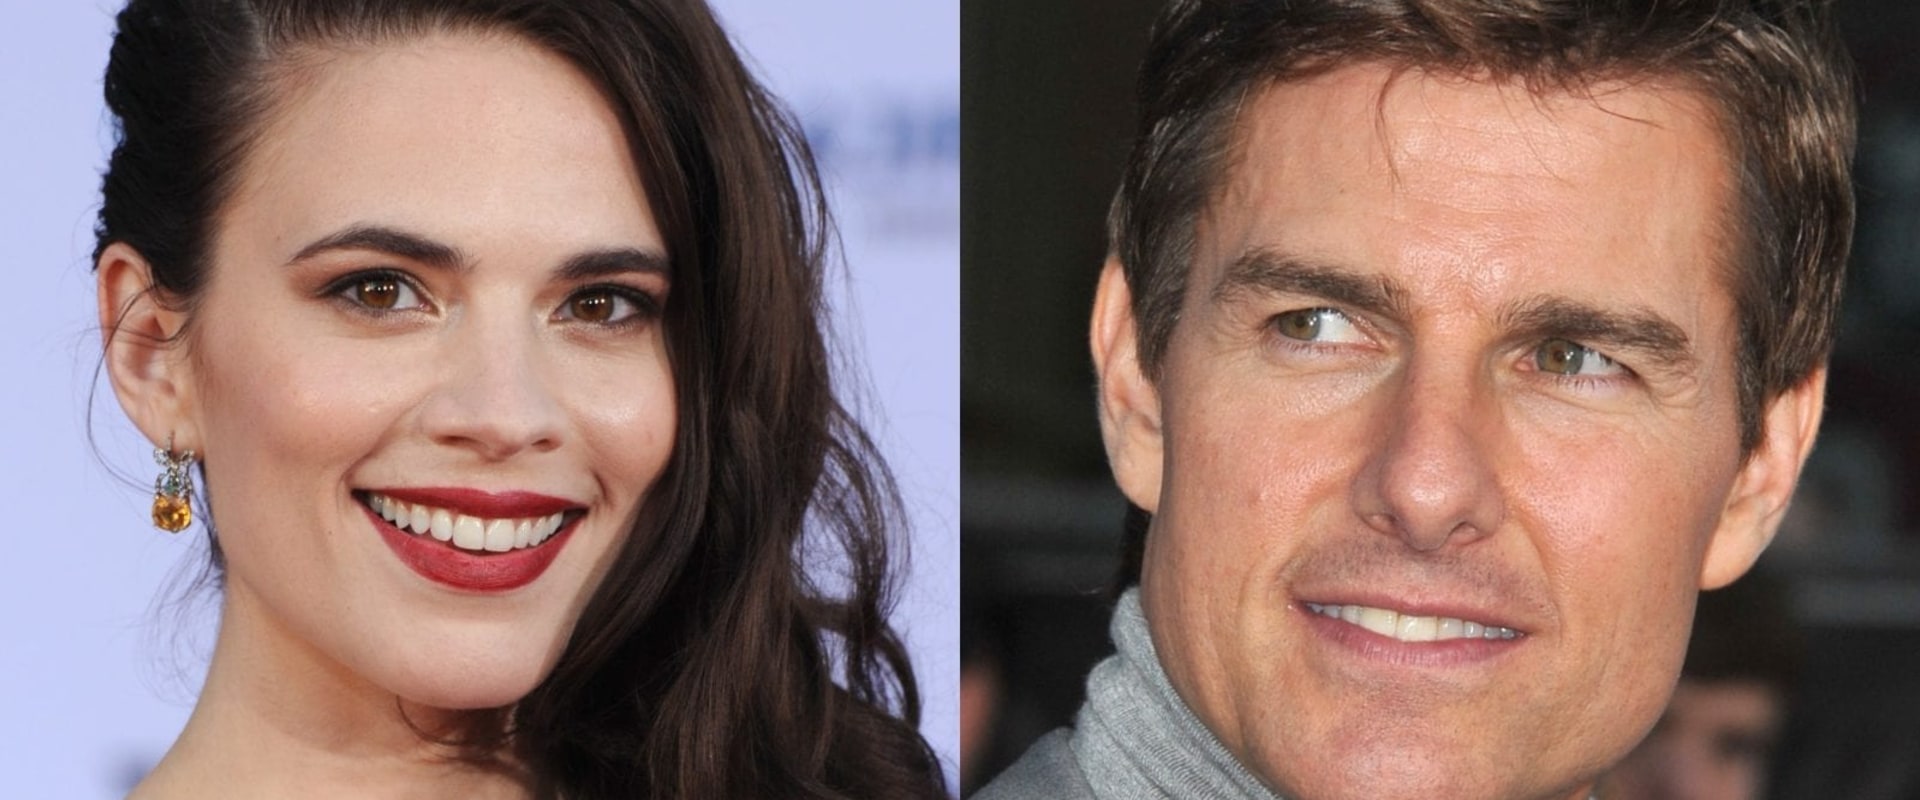 Is Tom Cruise Ready to Mingle?